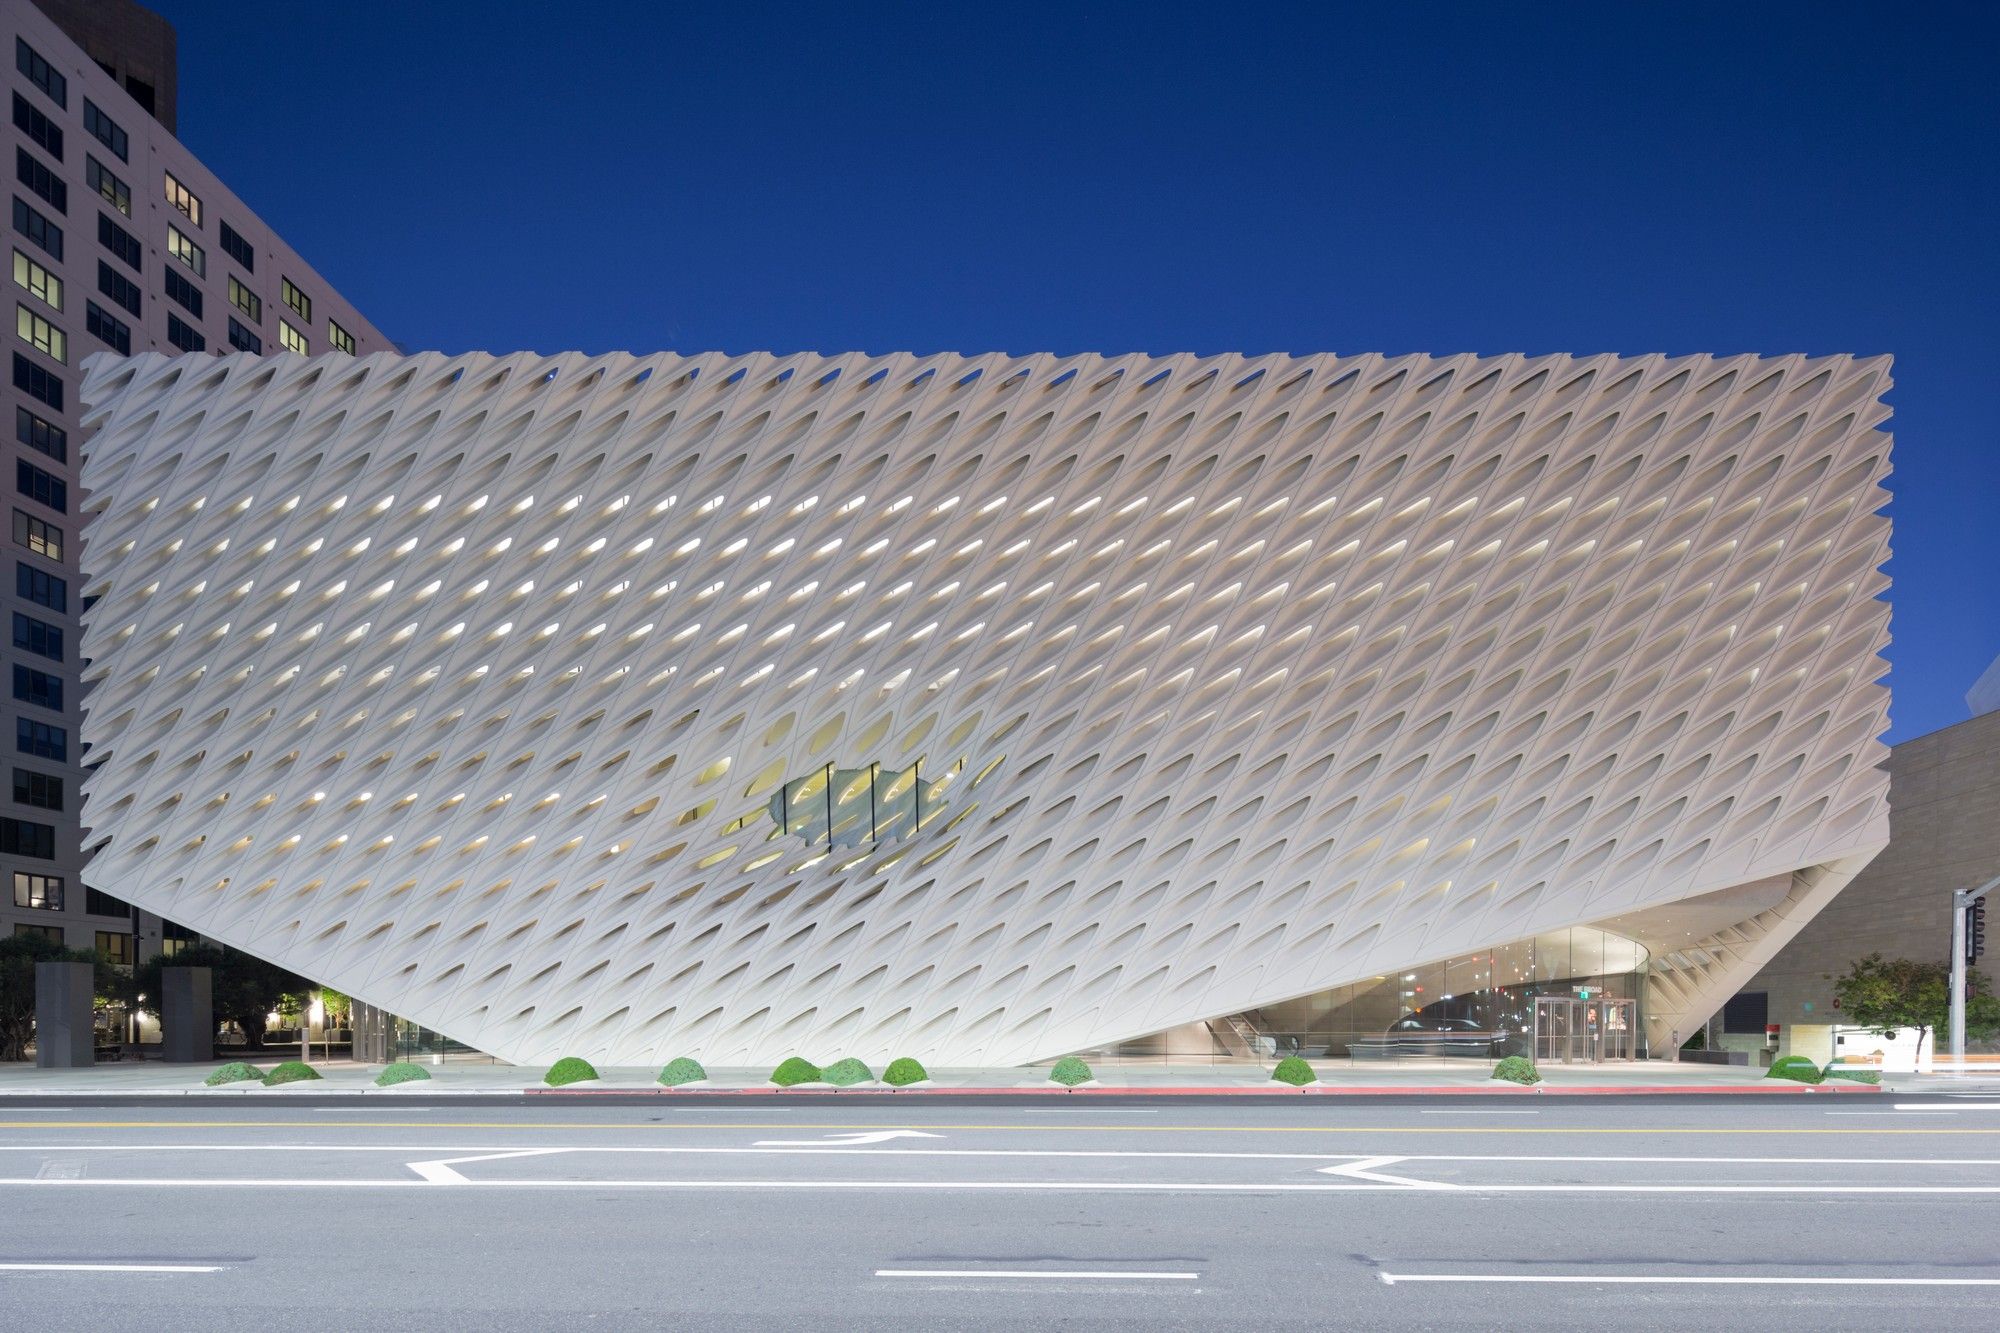 Exterior elevation of The Broad museum showing the entrance corners